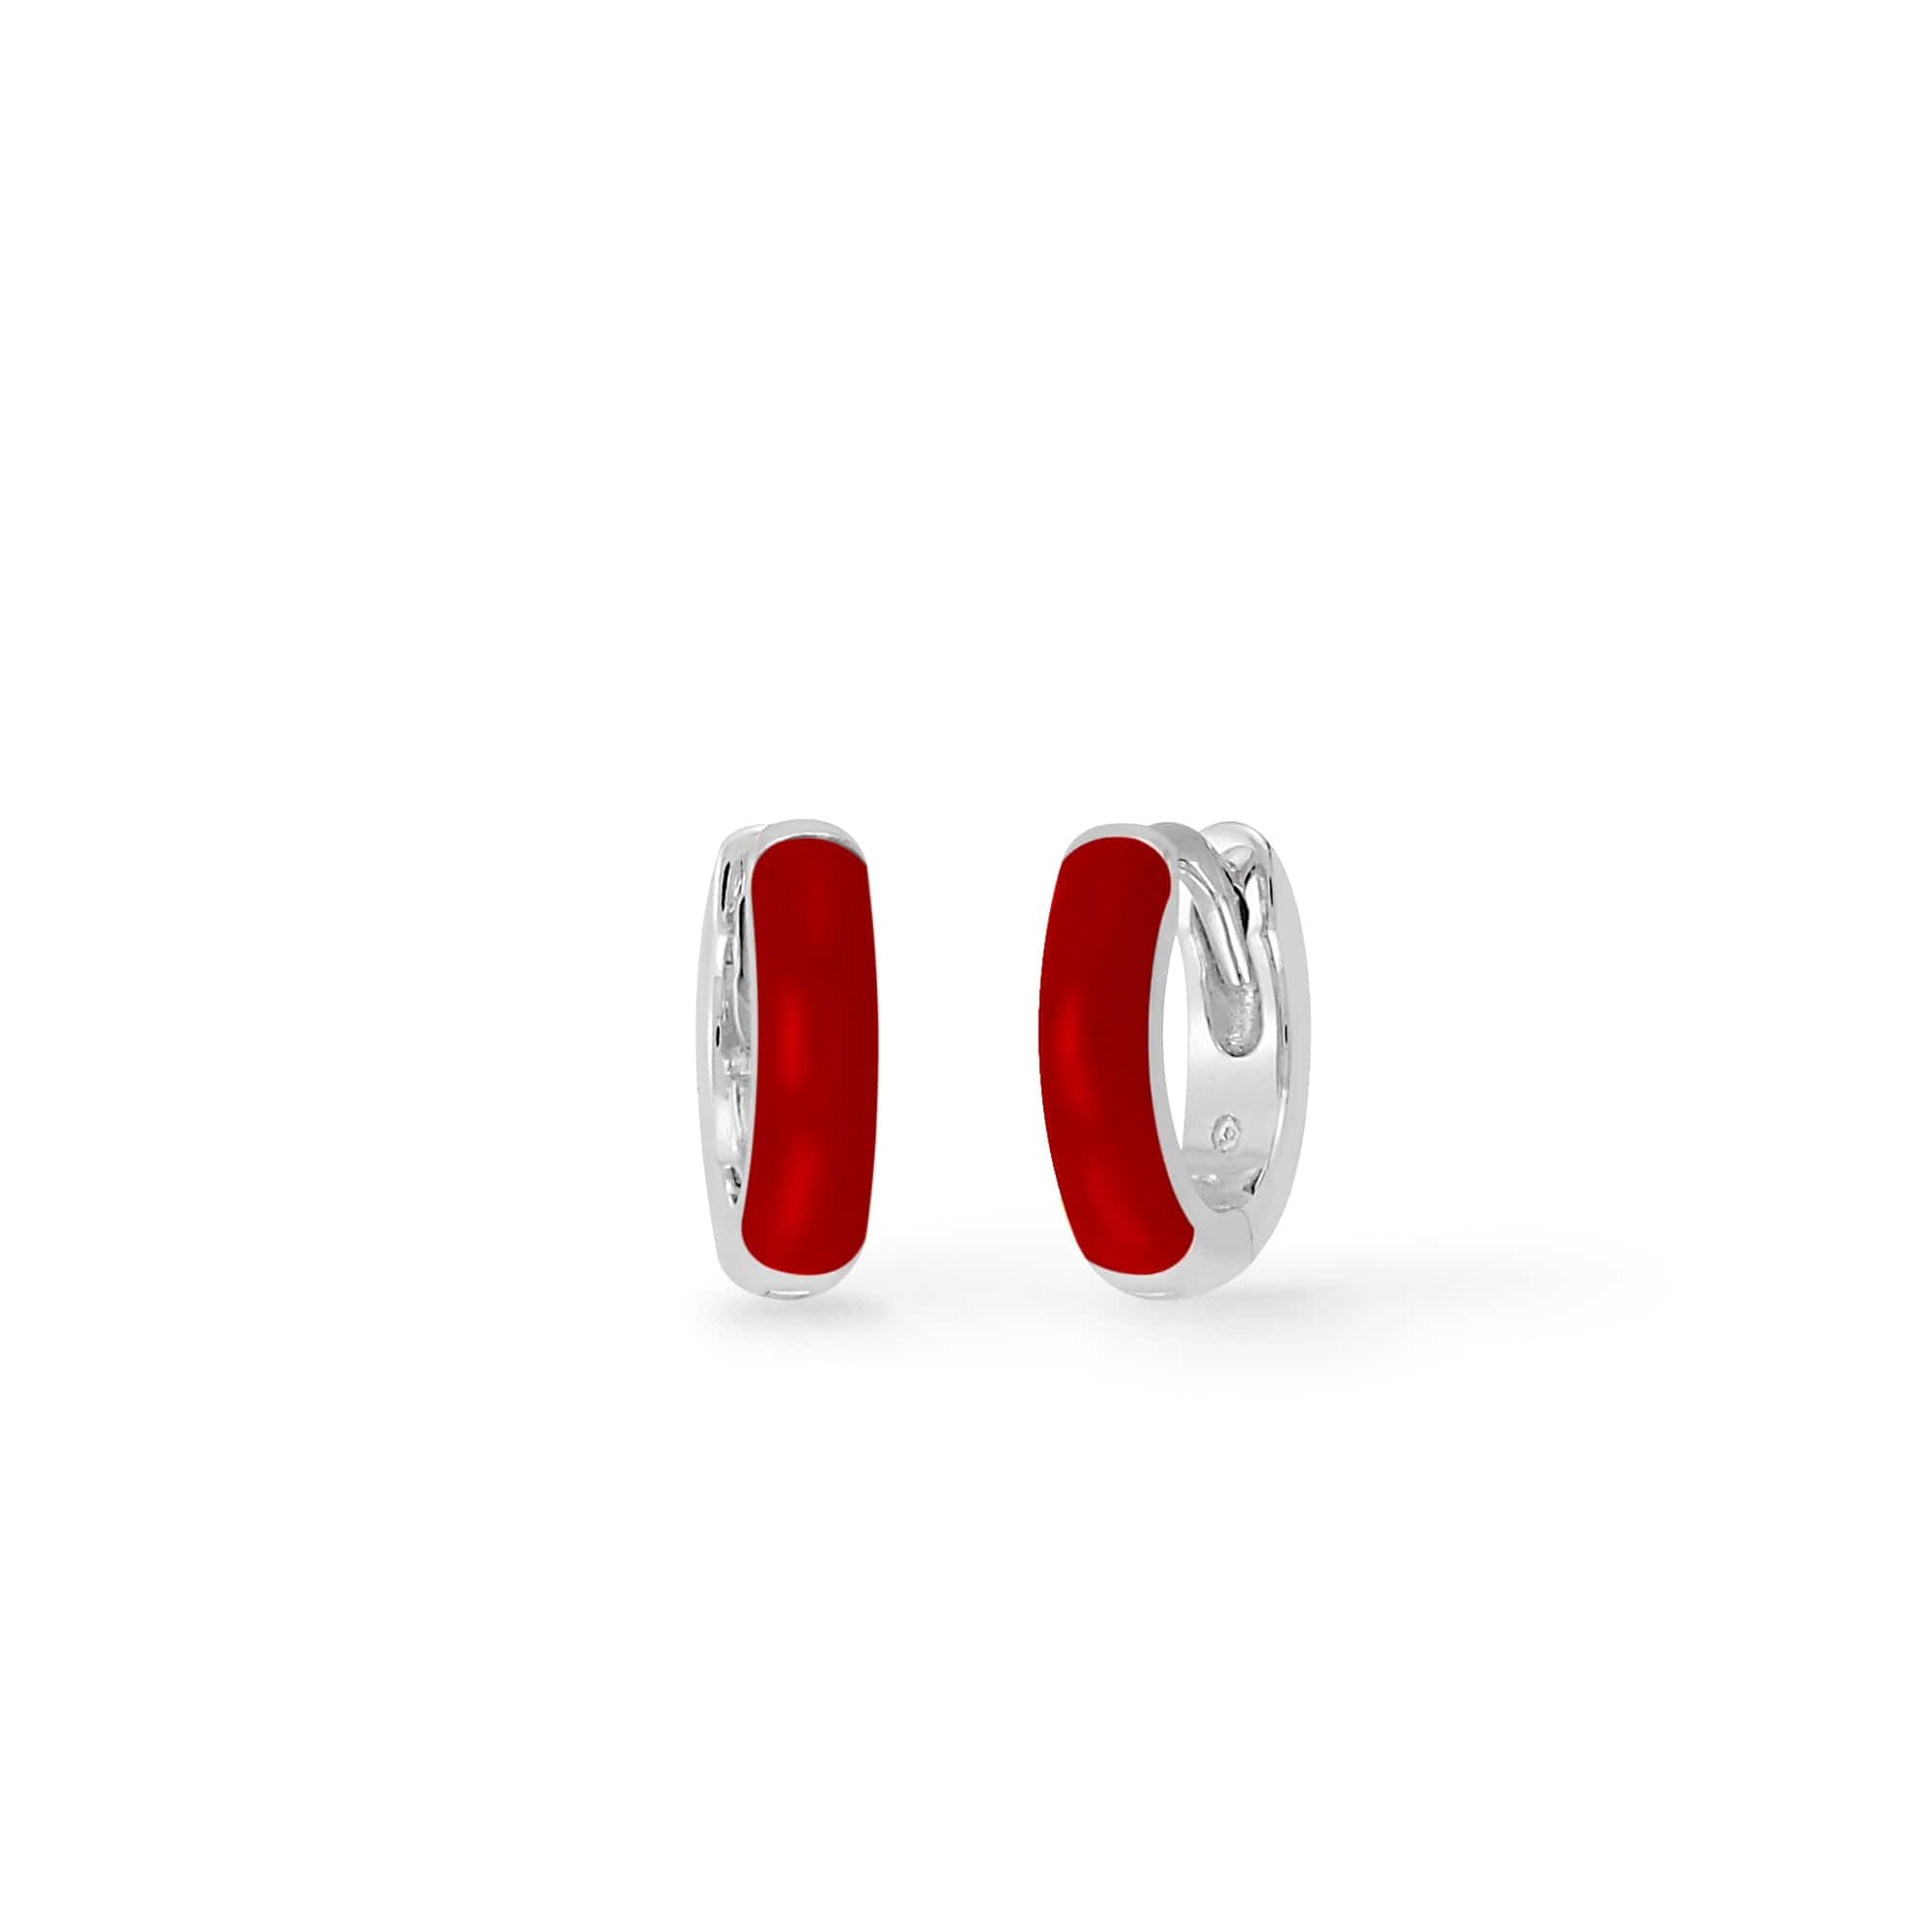 Boma Jewelry Earrings Red / Sterling Silver Mini Huggie Hoops with Color